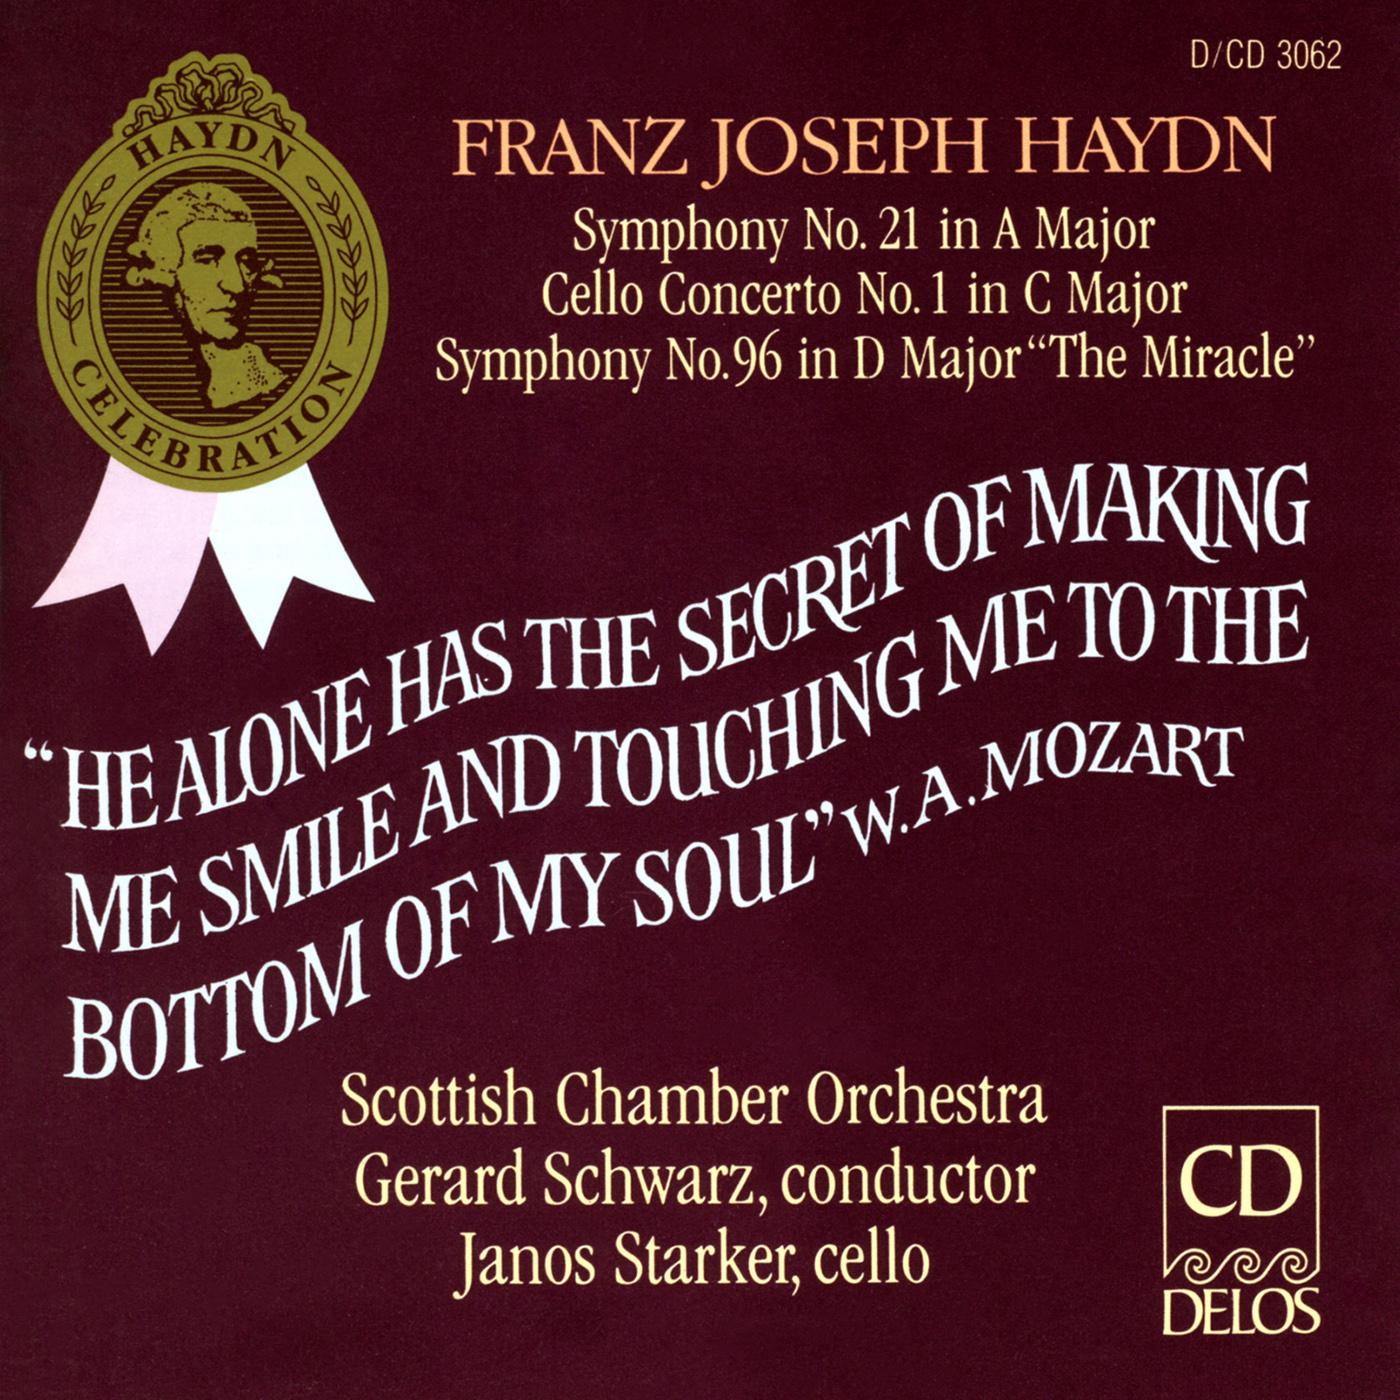 HAYDN, J.: Symphonies Nos. 21 and 96 / Cello Concerto No. 1 in C Major (Starker, Scottish Chamber Orchestra, Schwarz)